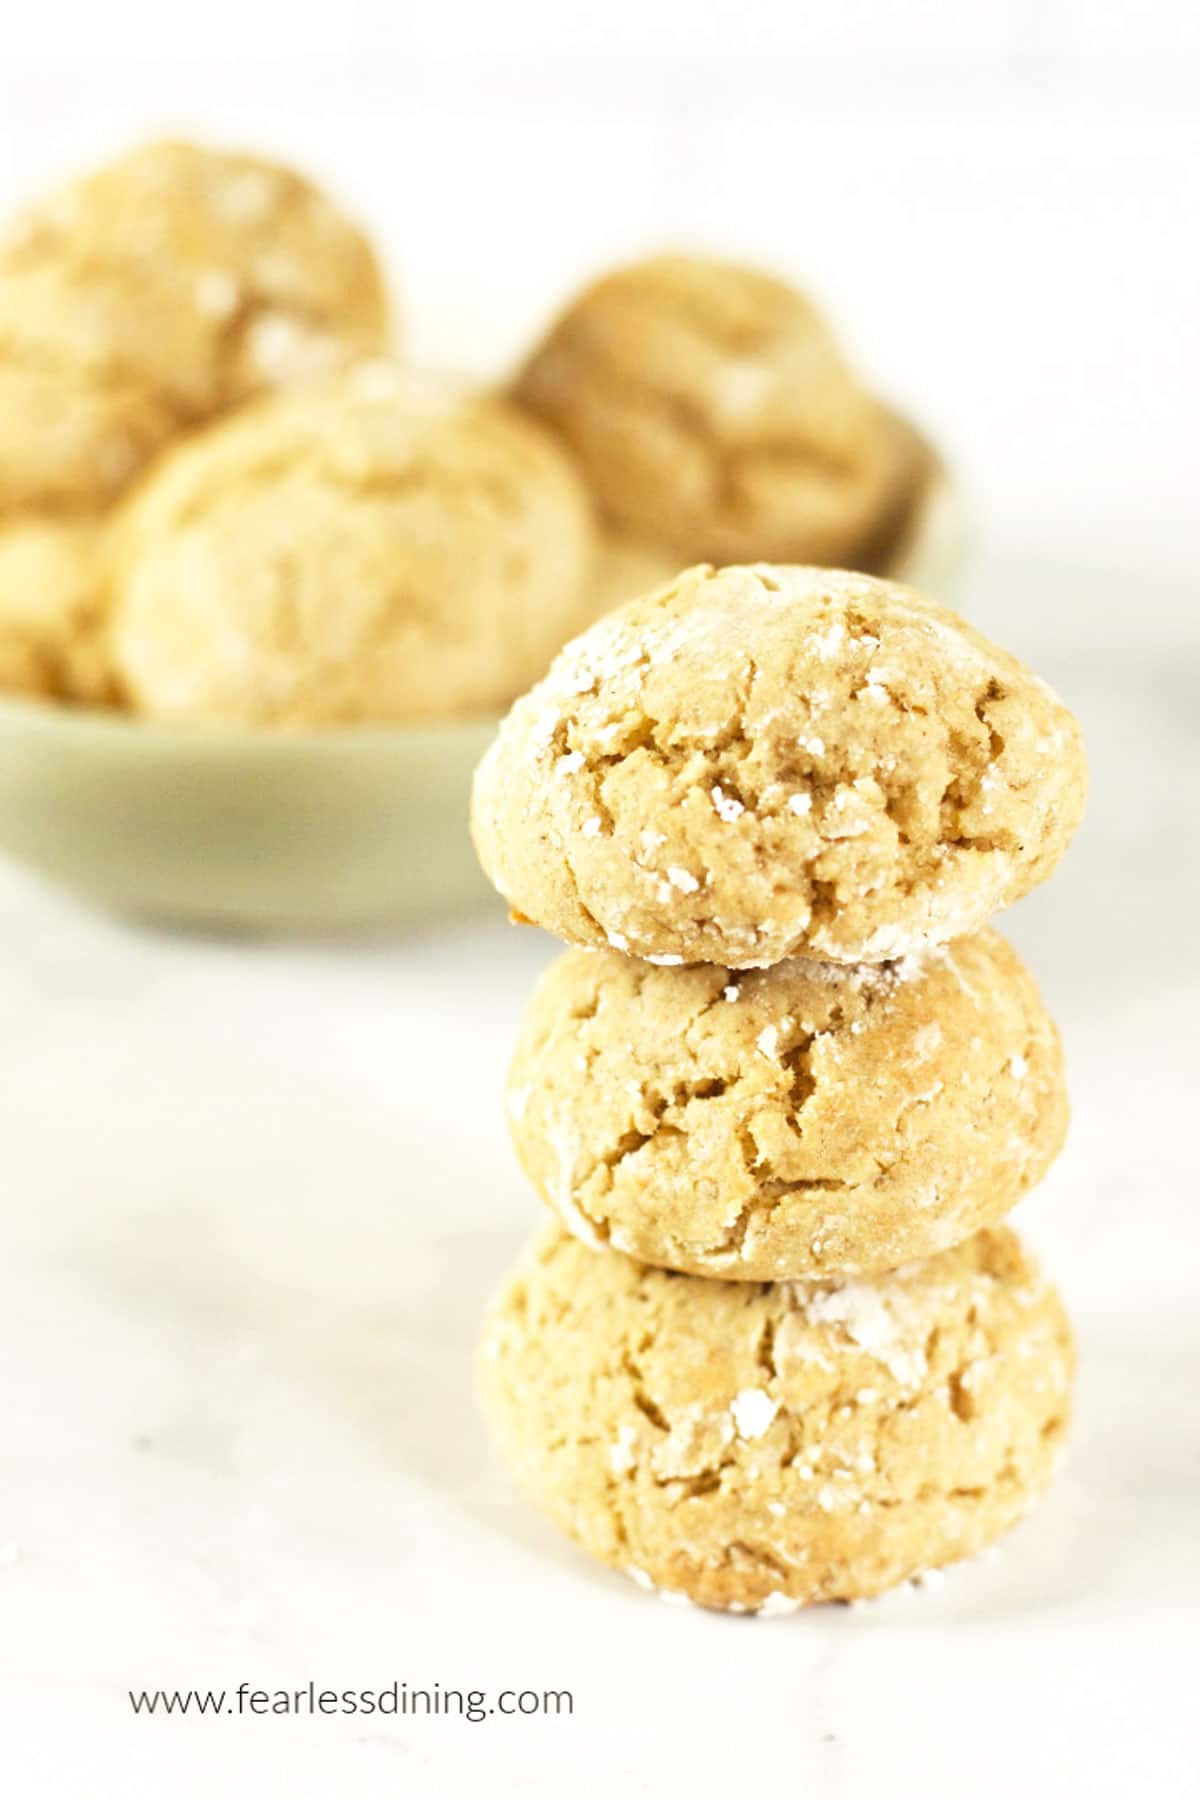 A stack of honey cookies next to a bowl of cookies.